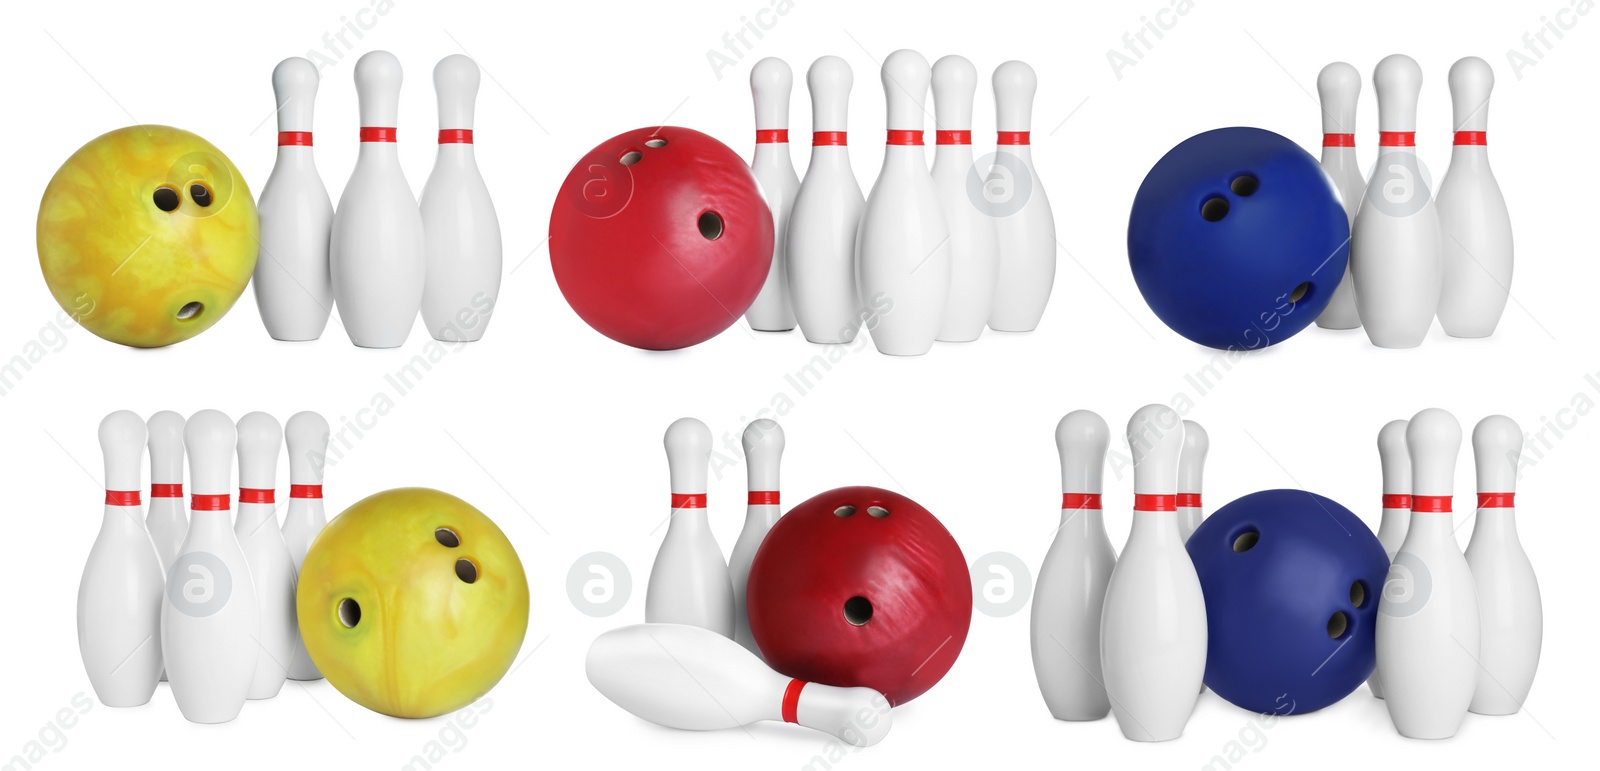 Image of Set of bowling balls and pins on white background